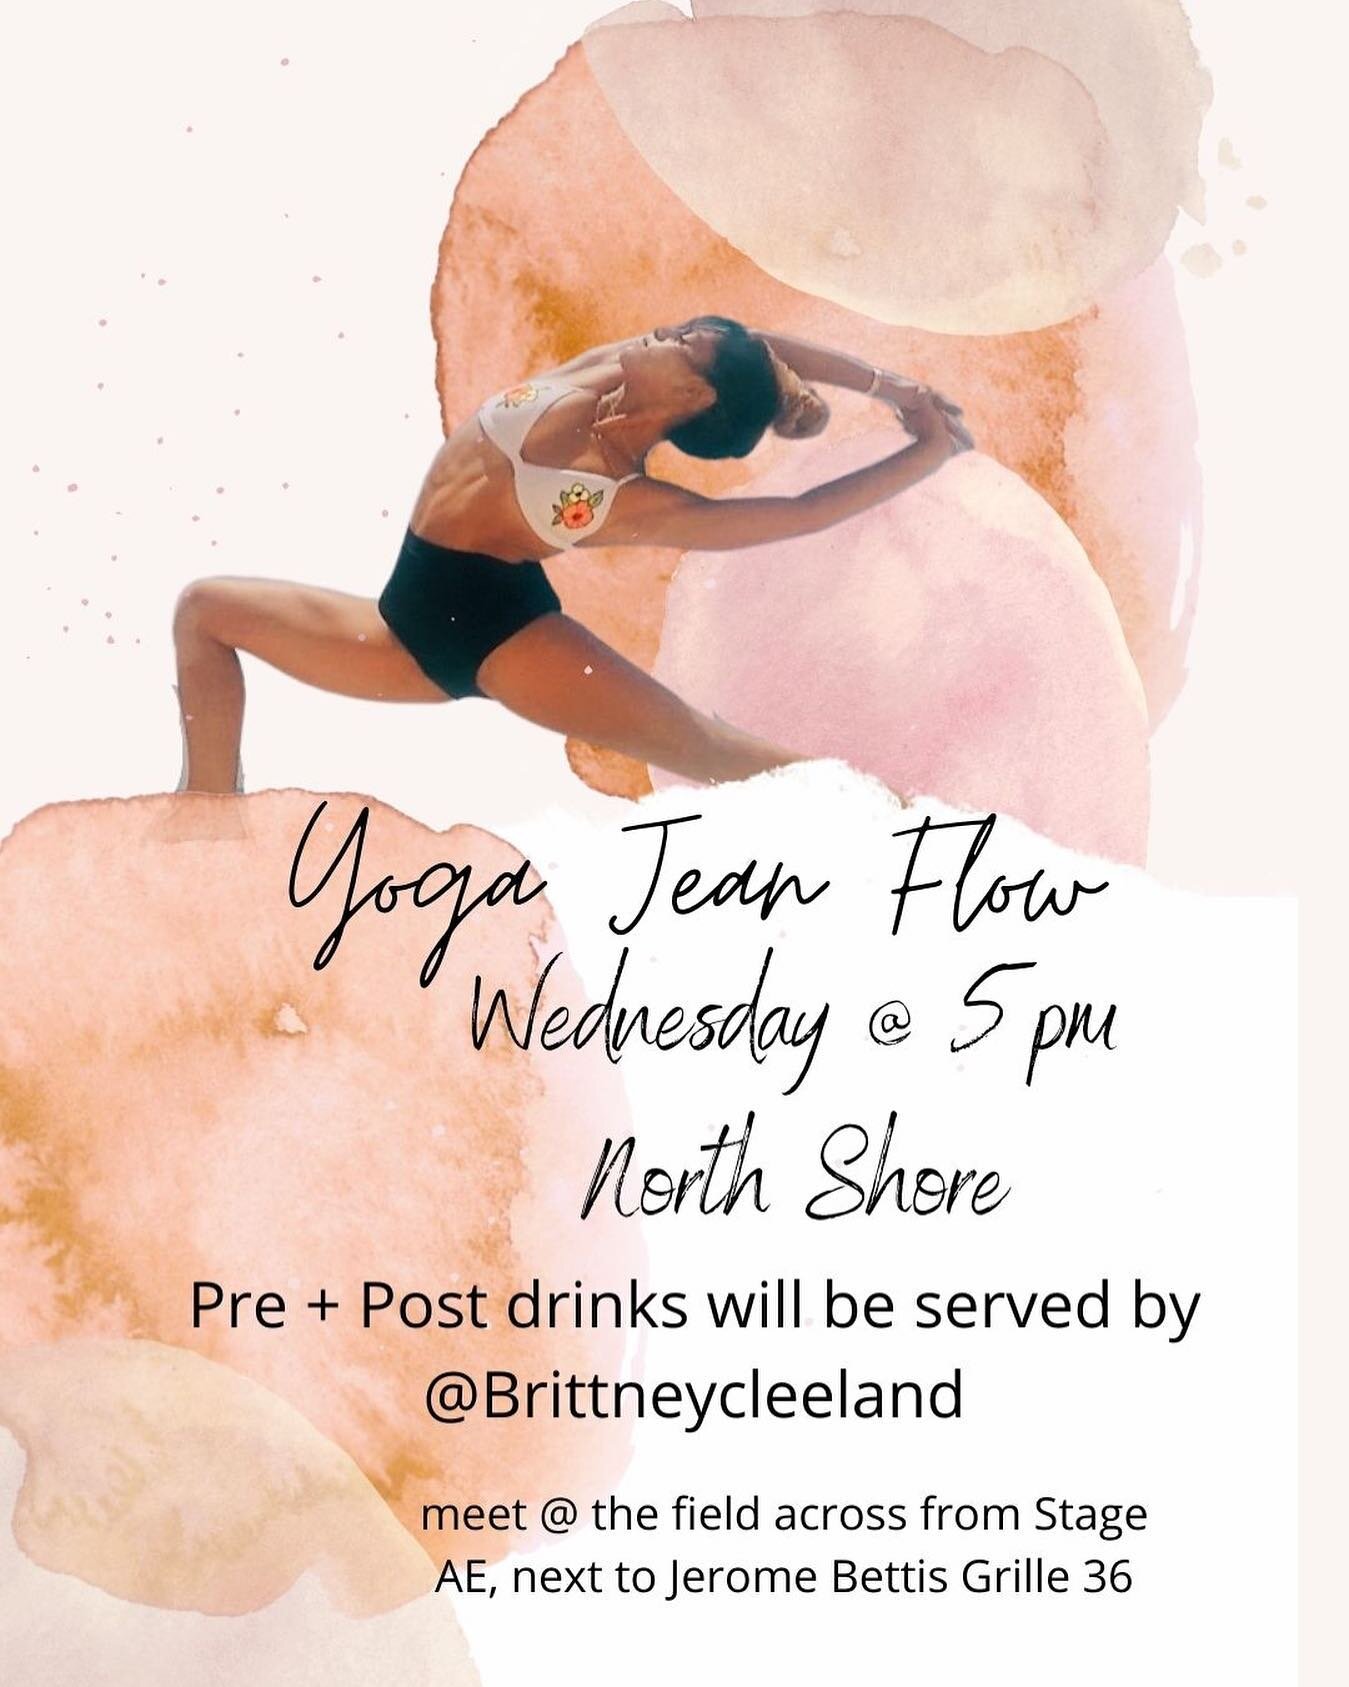 Pop-Up flow, TOMORROW💙🌊

Message me with your questions or if you are joining us!⚡️⚡️ @brittneycleeland is going to be serving us up some healthy teas + post recovery shakes!

&amp; yes it&rsquo;s all free- this time only :)